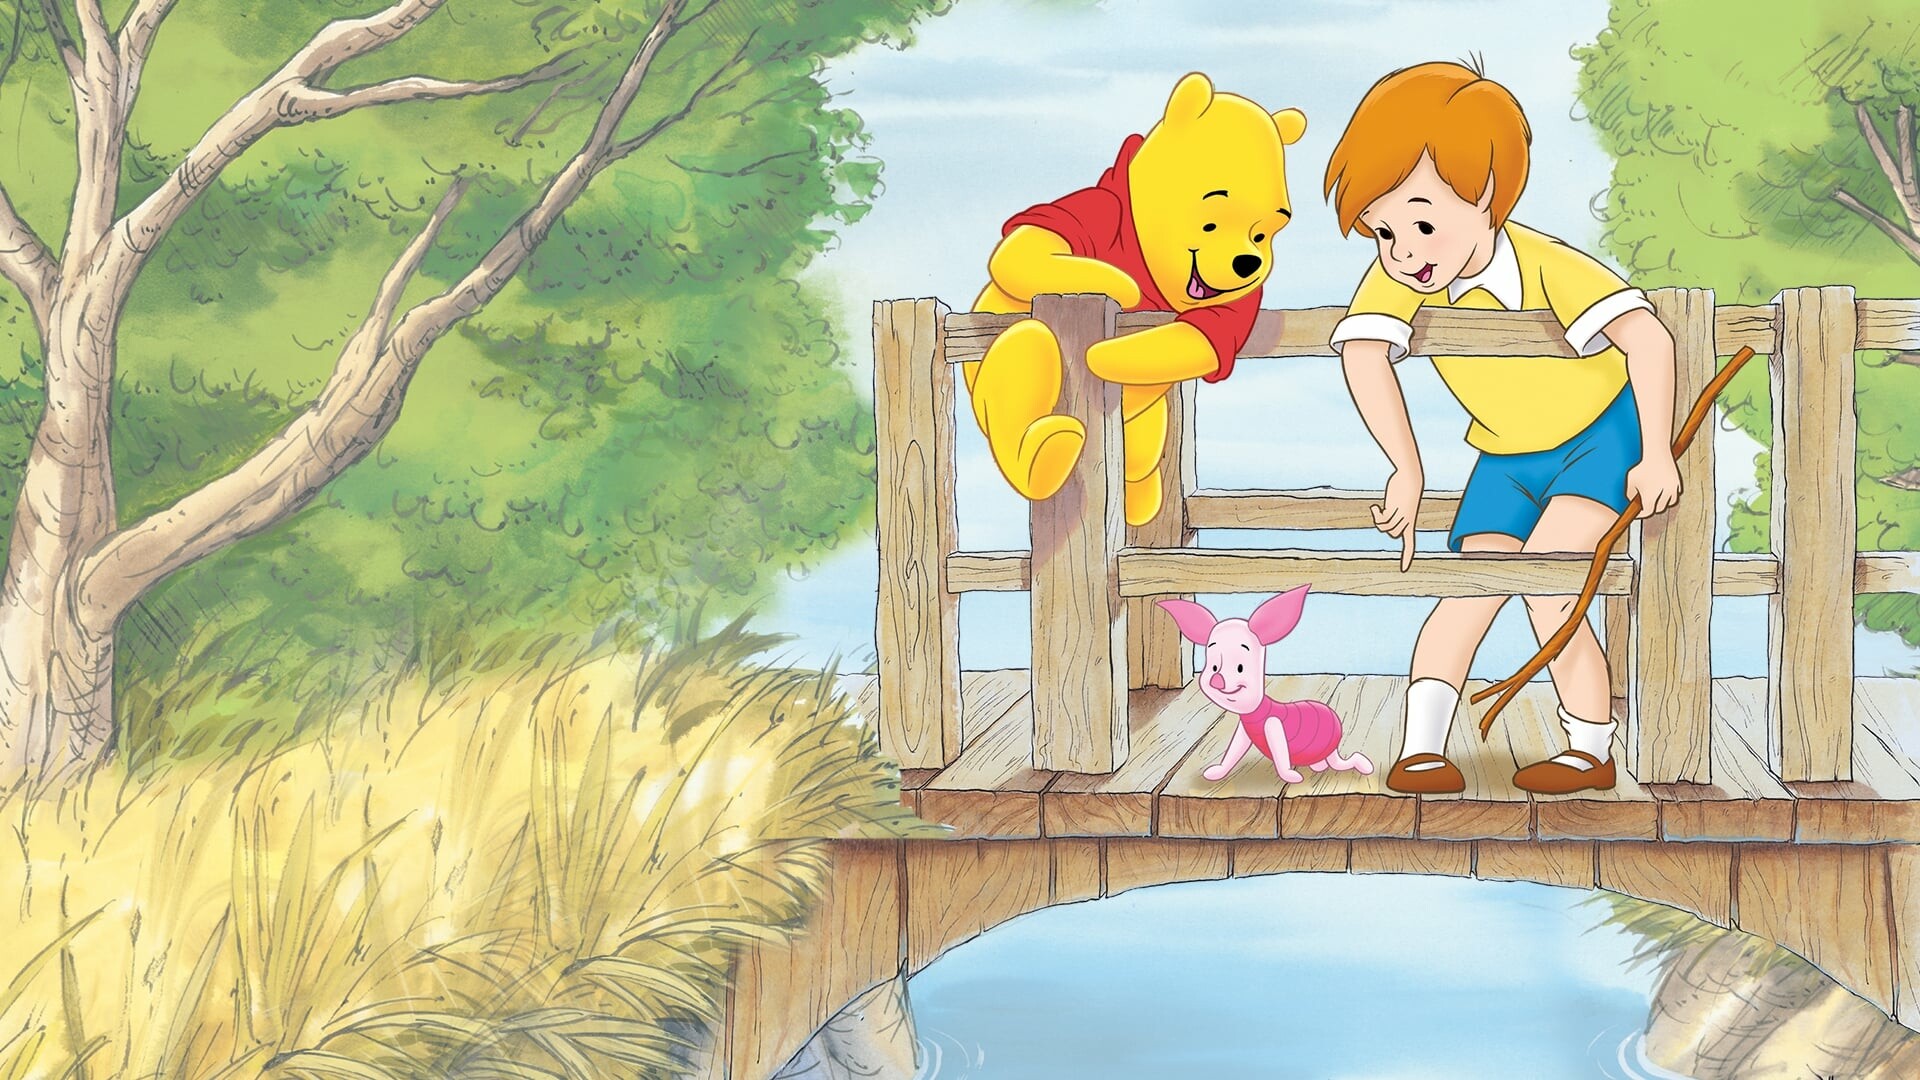 The Many Adventures of Winnie the Pooh: Released on March 11, 1977, Directed by Wolfgang Reitherman and John Lounsbery. 1920x1080 Full HD Wallpaper.